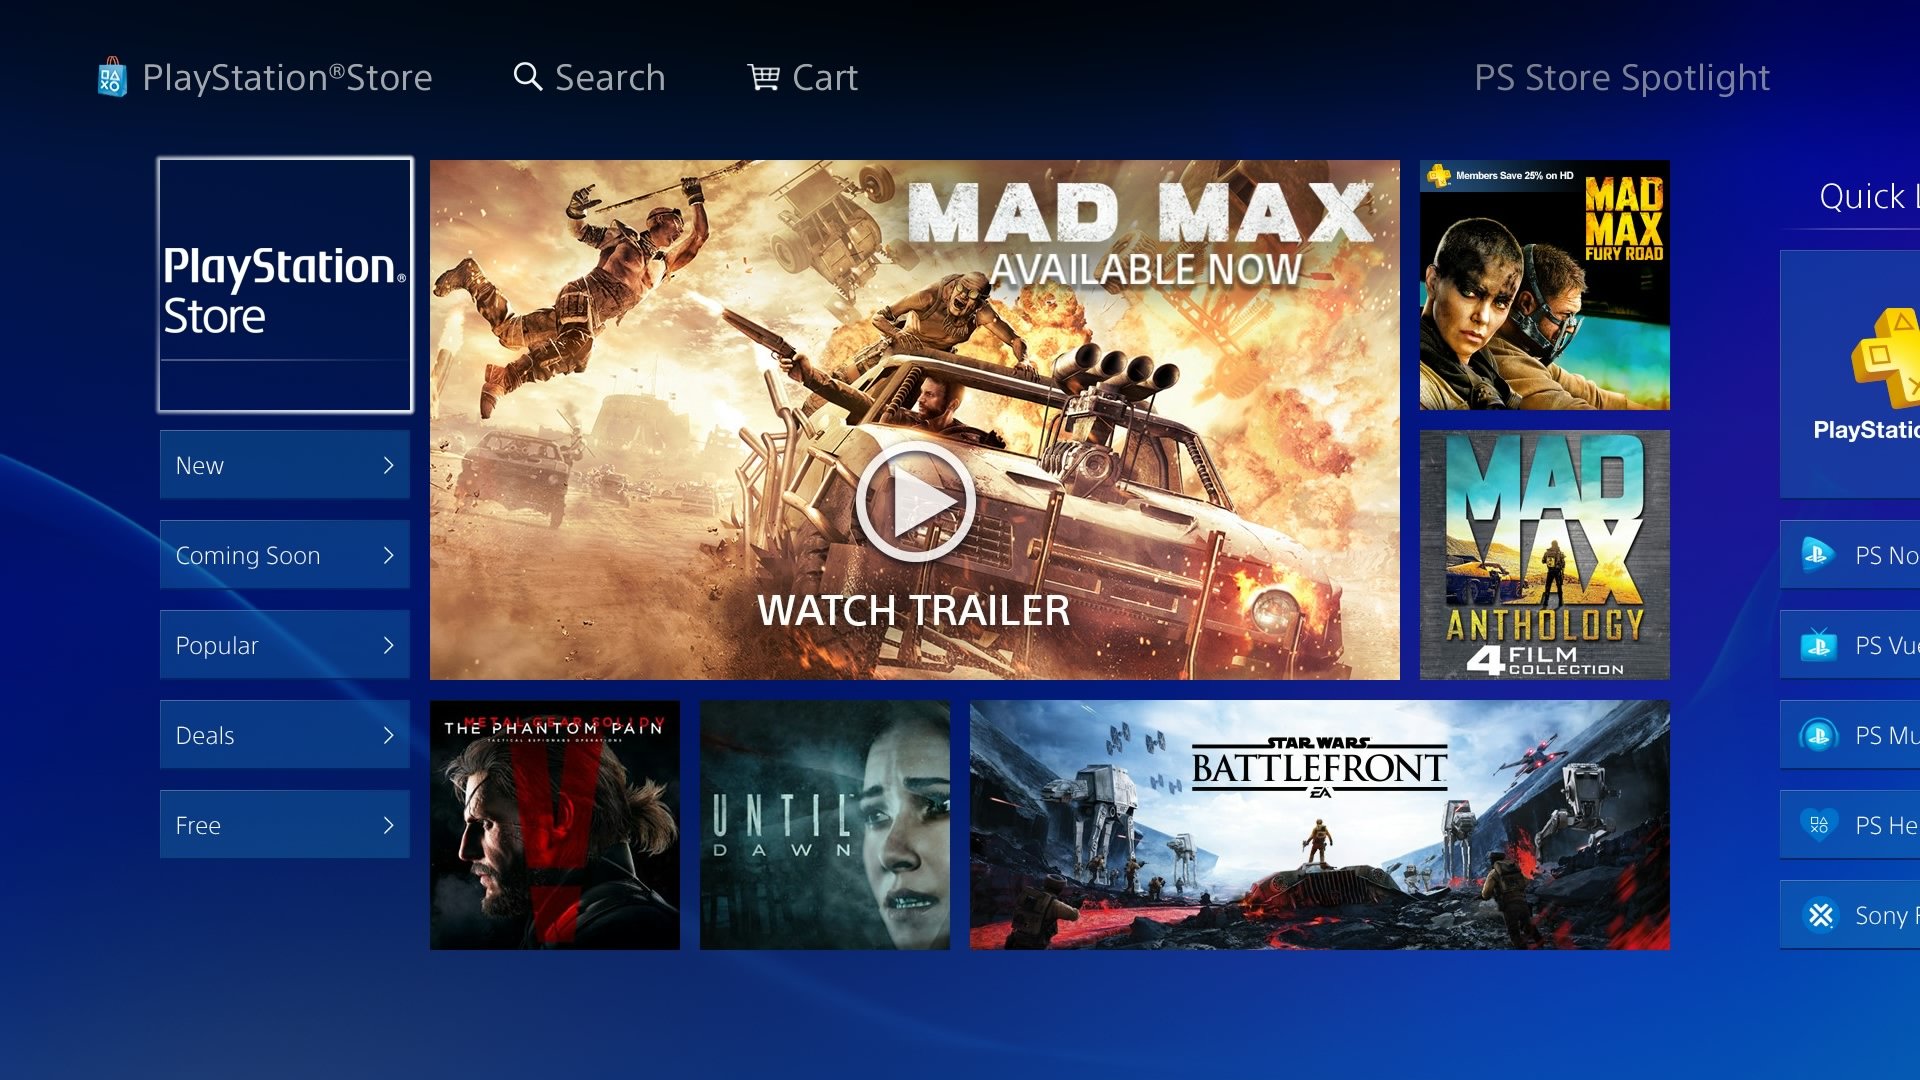 the ps4 store